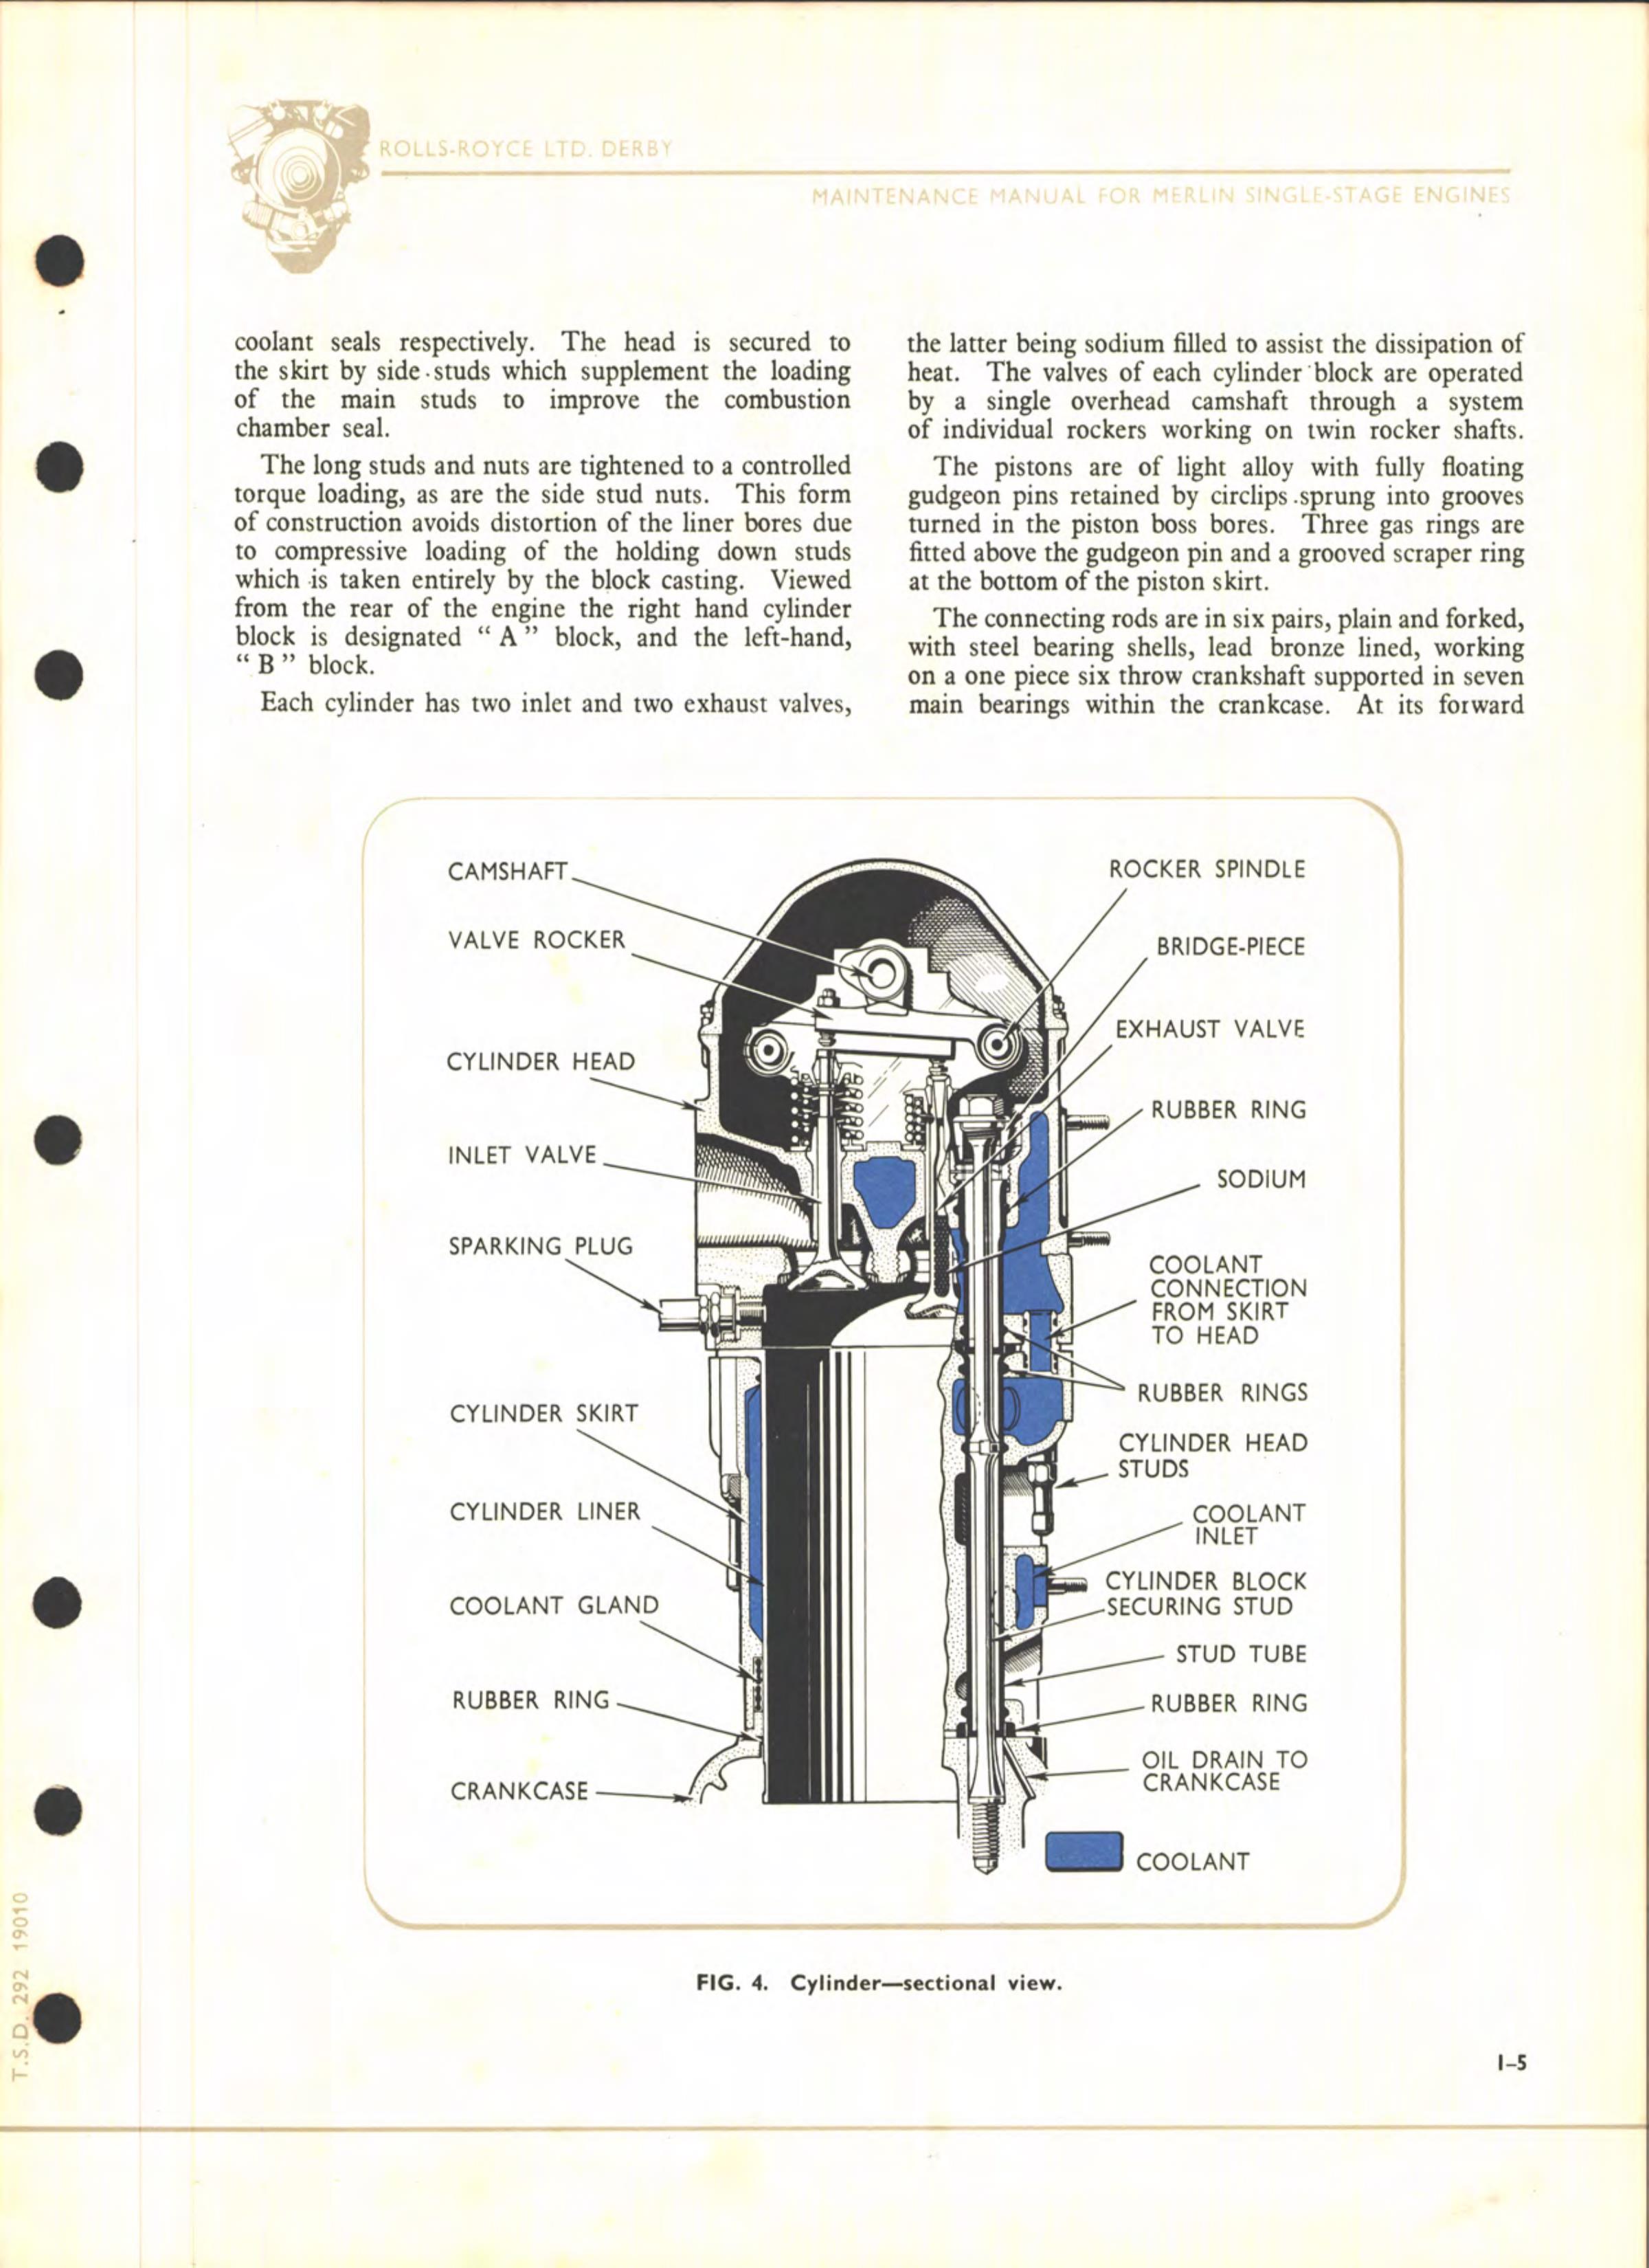 Sample page 23 from AirCorps Library document: Maintenance Manual for Single Stage Merlin Engines